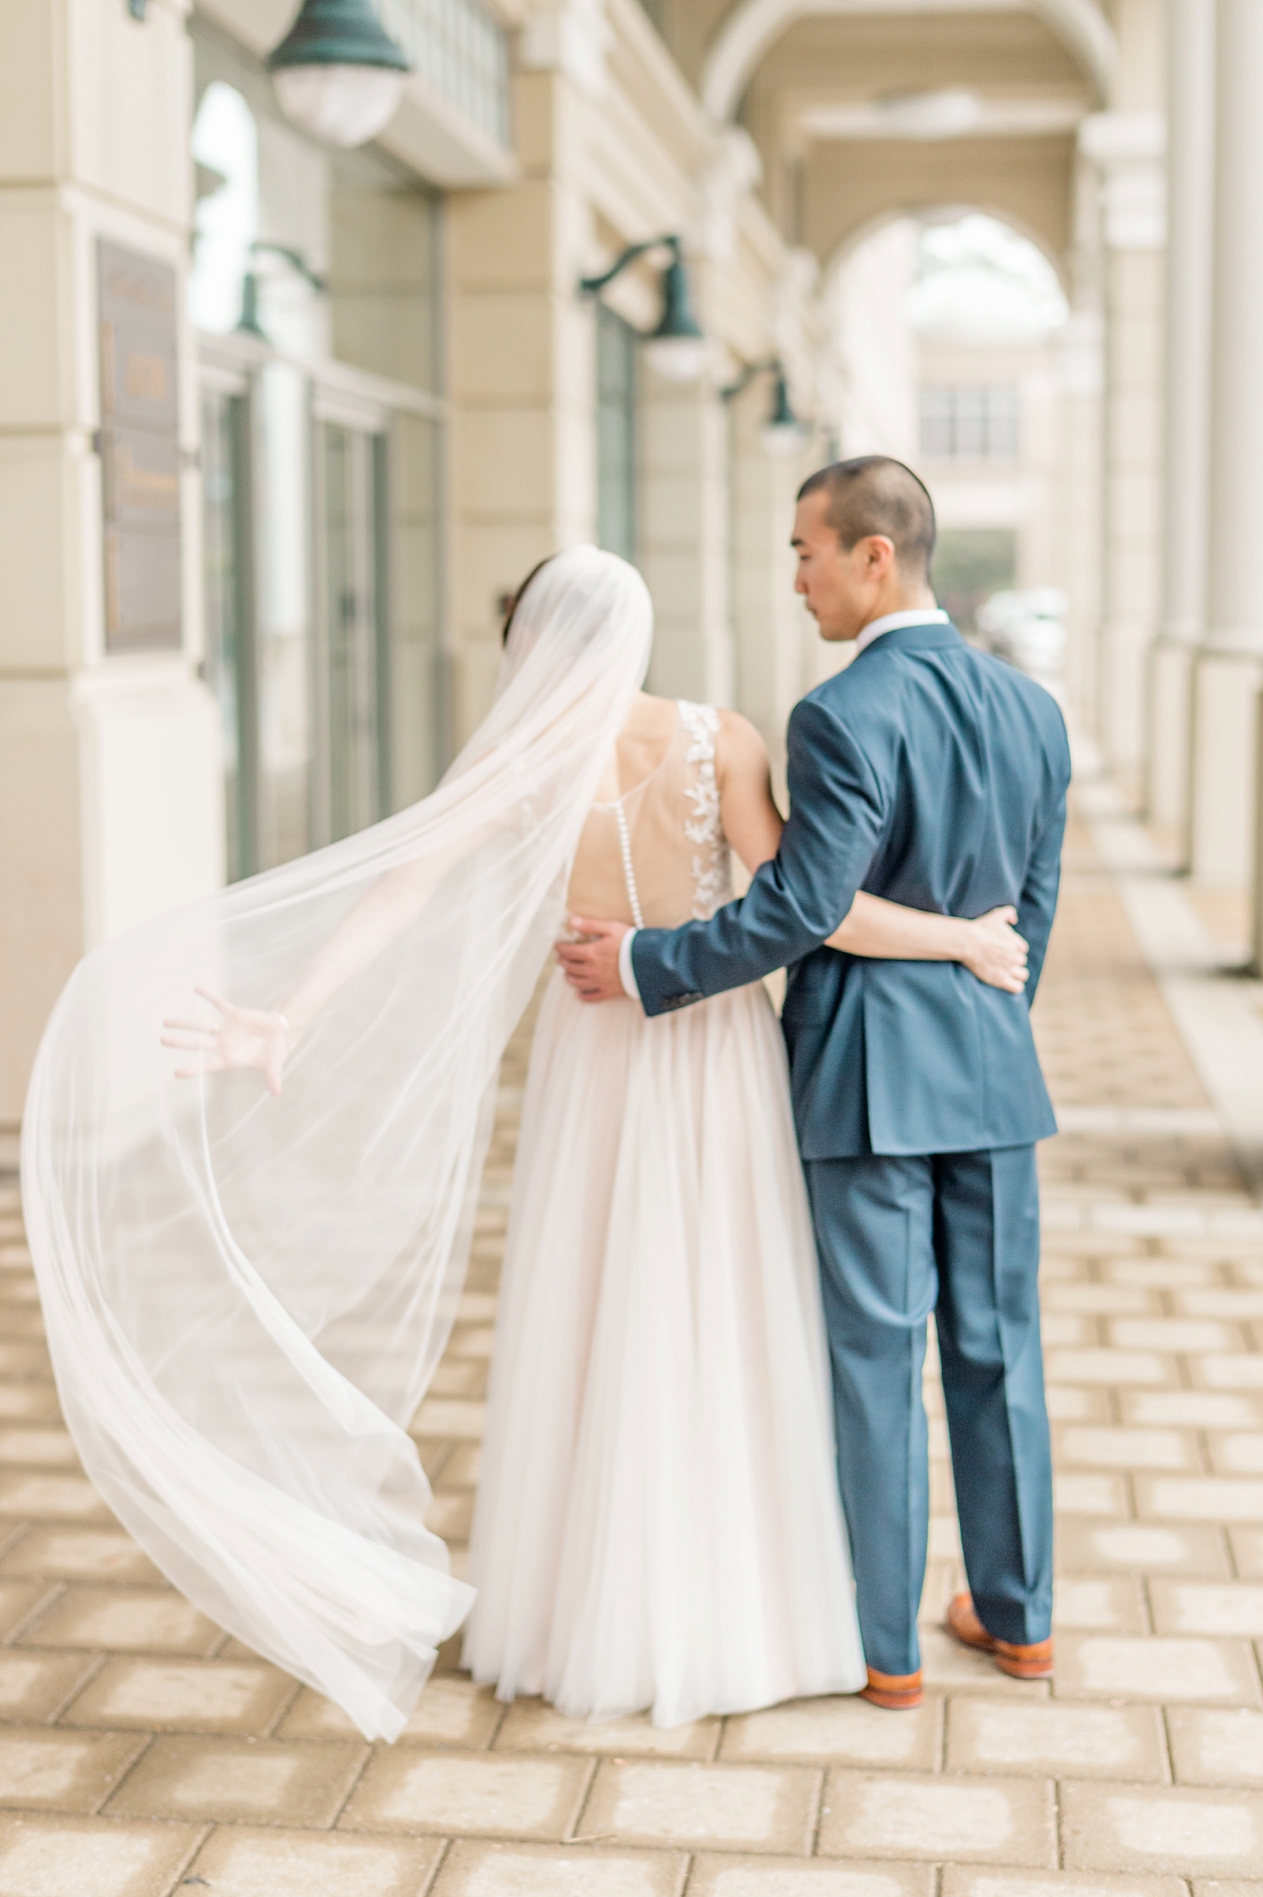 A Rainy Day Wedding full of Relaxed and Romantic Details at Historic Londontown Gardens by Maryland Fine Art Photographer Lauren R Swann